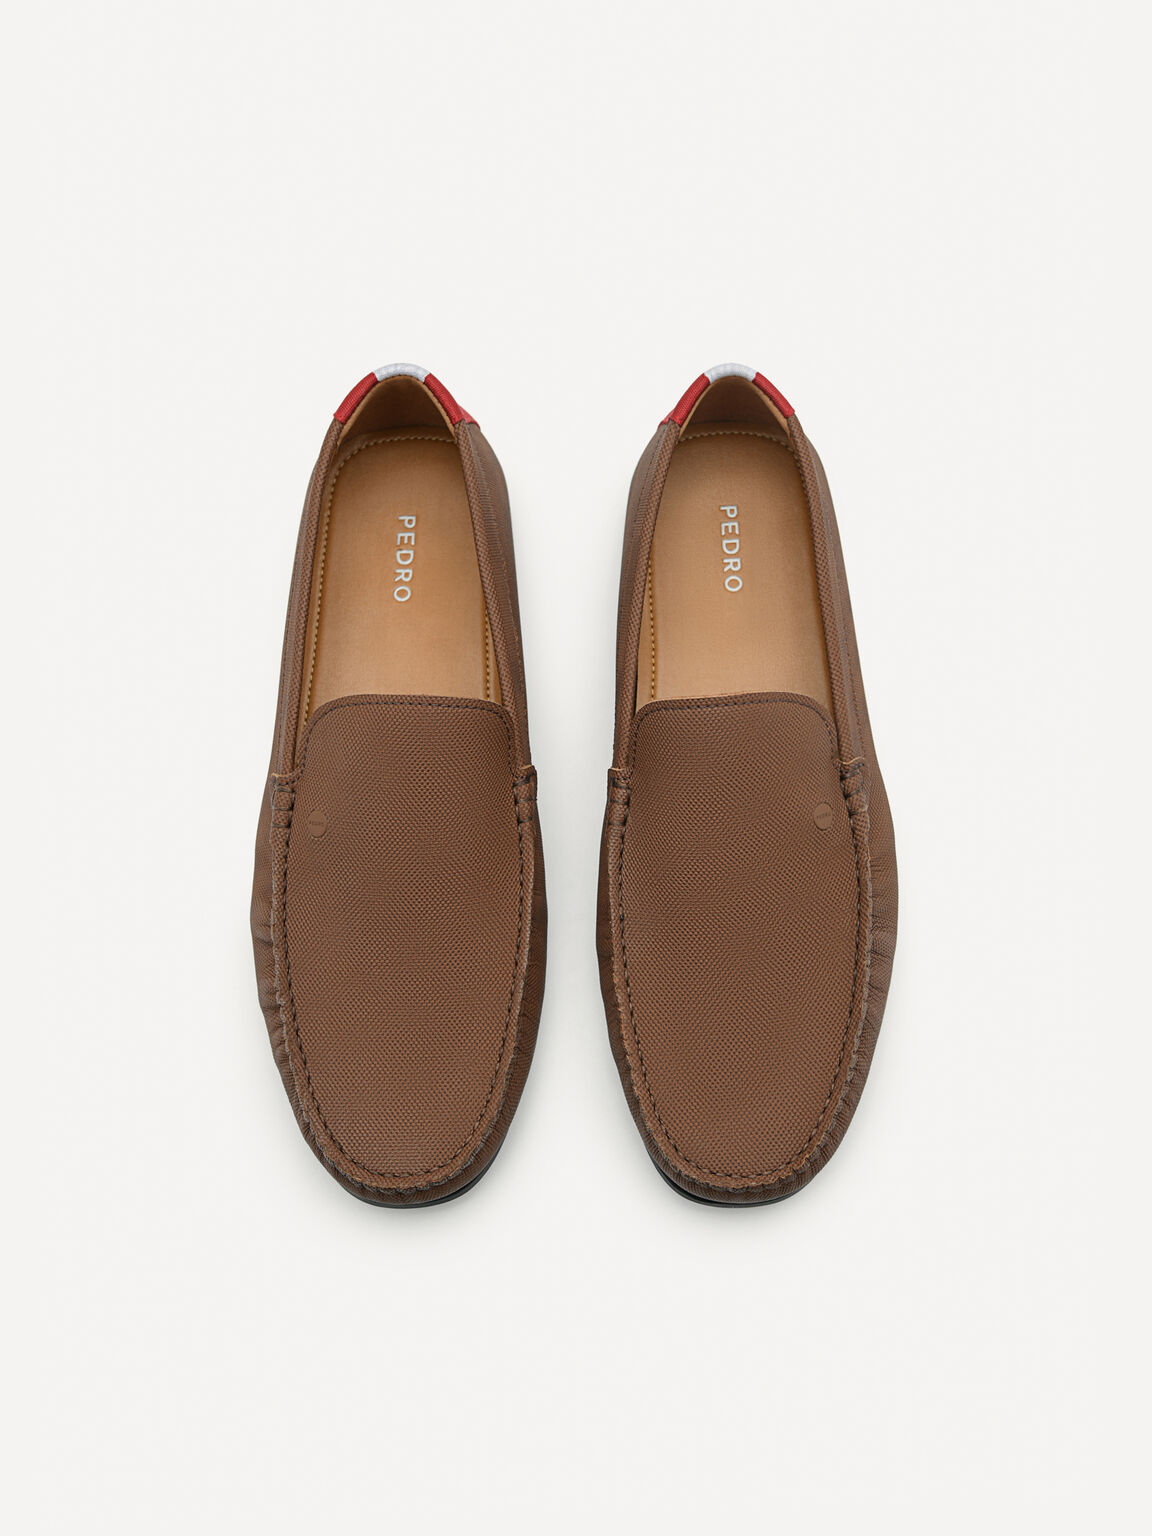 Leather & Fabric Slip-On Moccasins, Brown